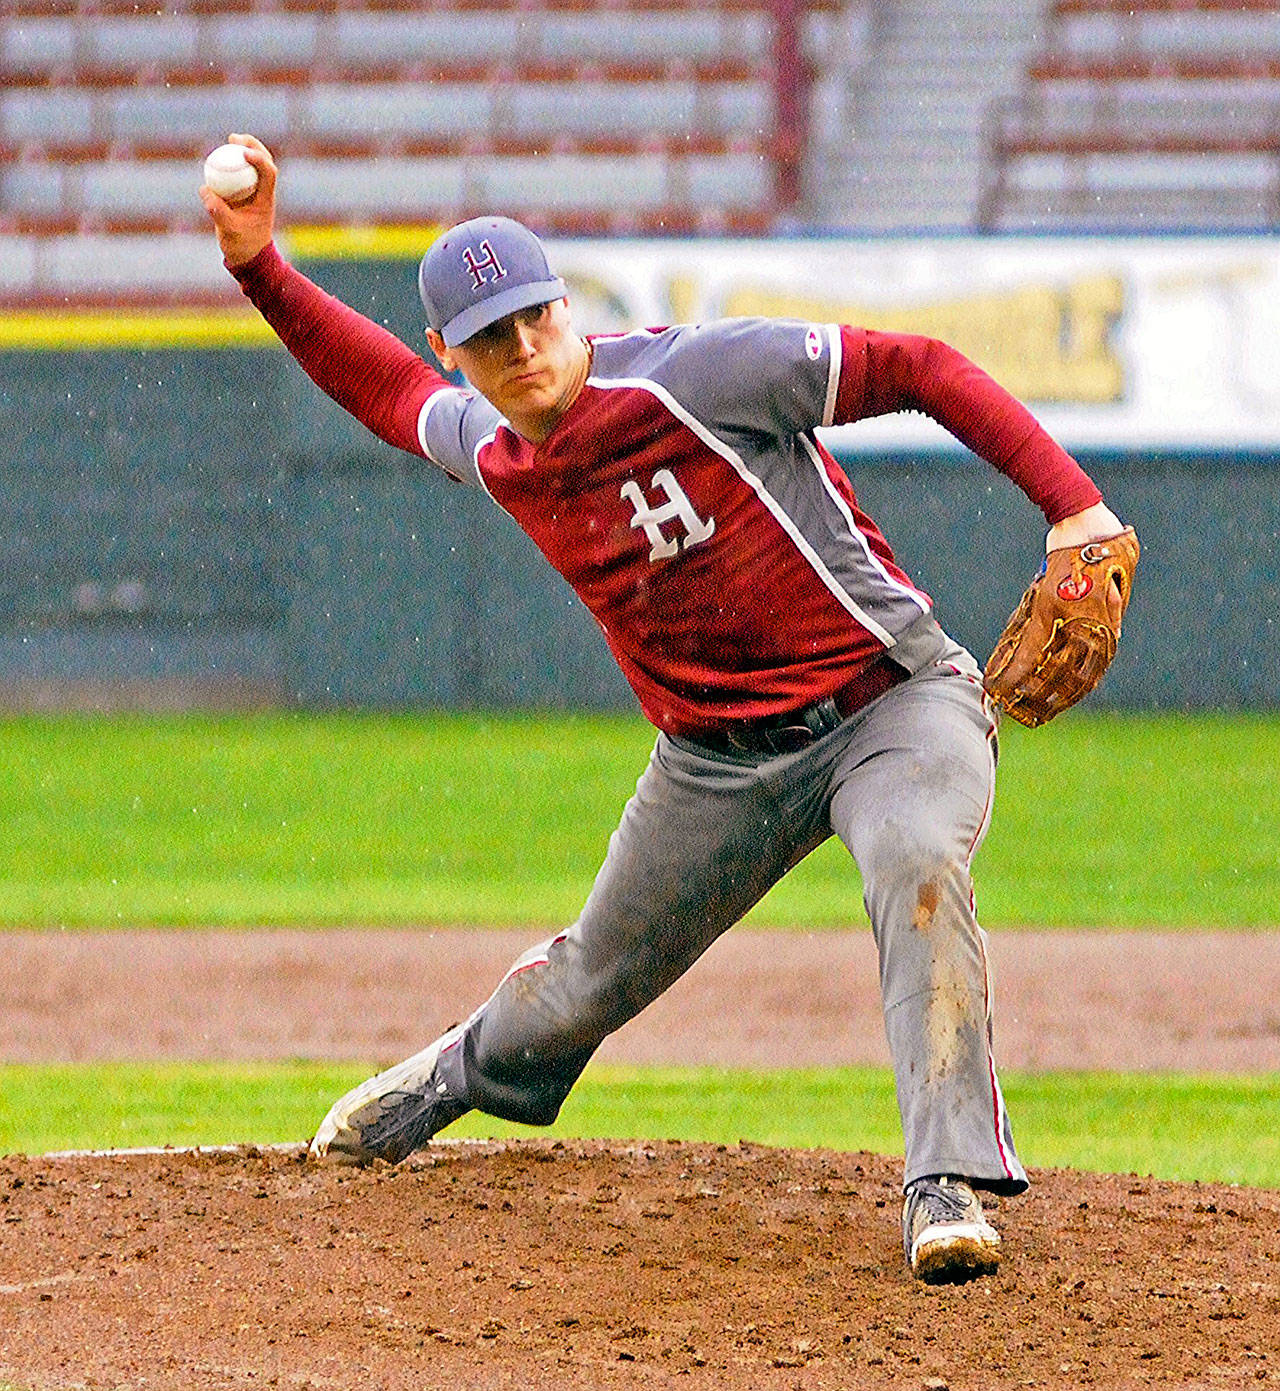 Hoquiam’s Payton Quintanilla delivers a pitch in the second inning against Forks. Quintanilla pitched 6 2/3 innings in the Grizzlies’ 6-5 win over the Spartans on Wednesday. (Hasani Grayson | Grays Harbor News Group)